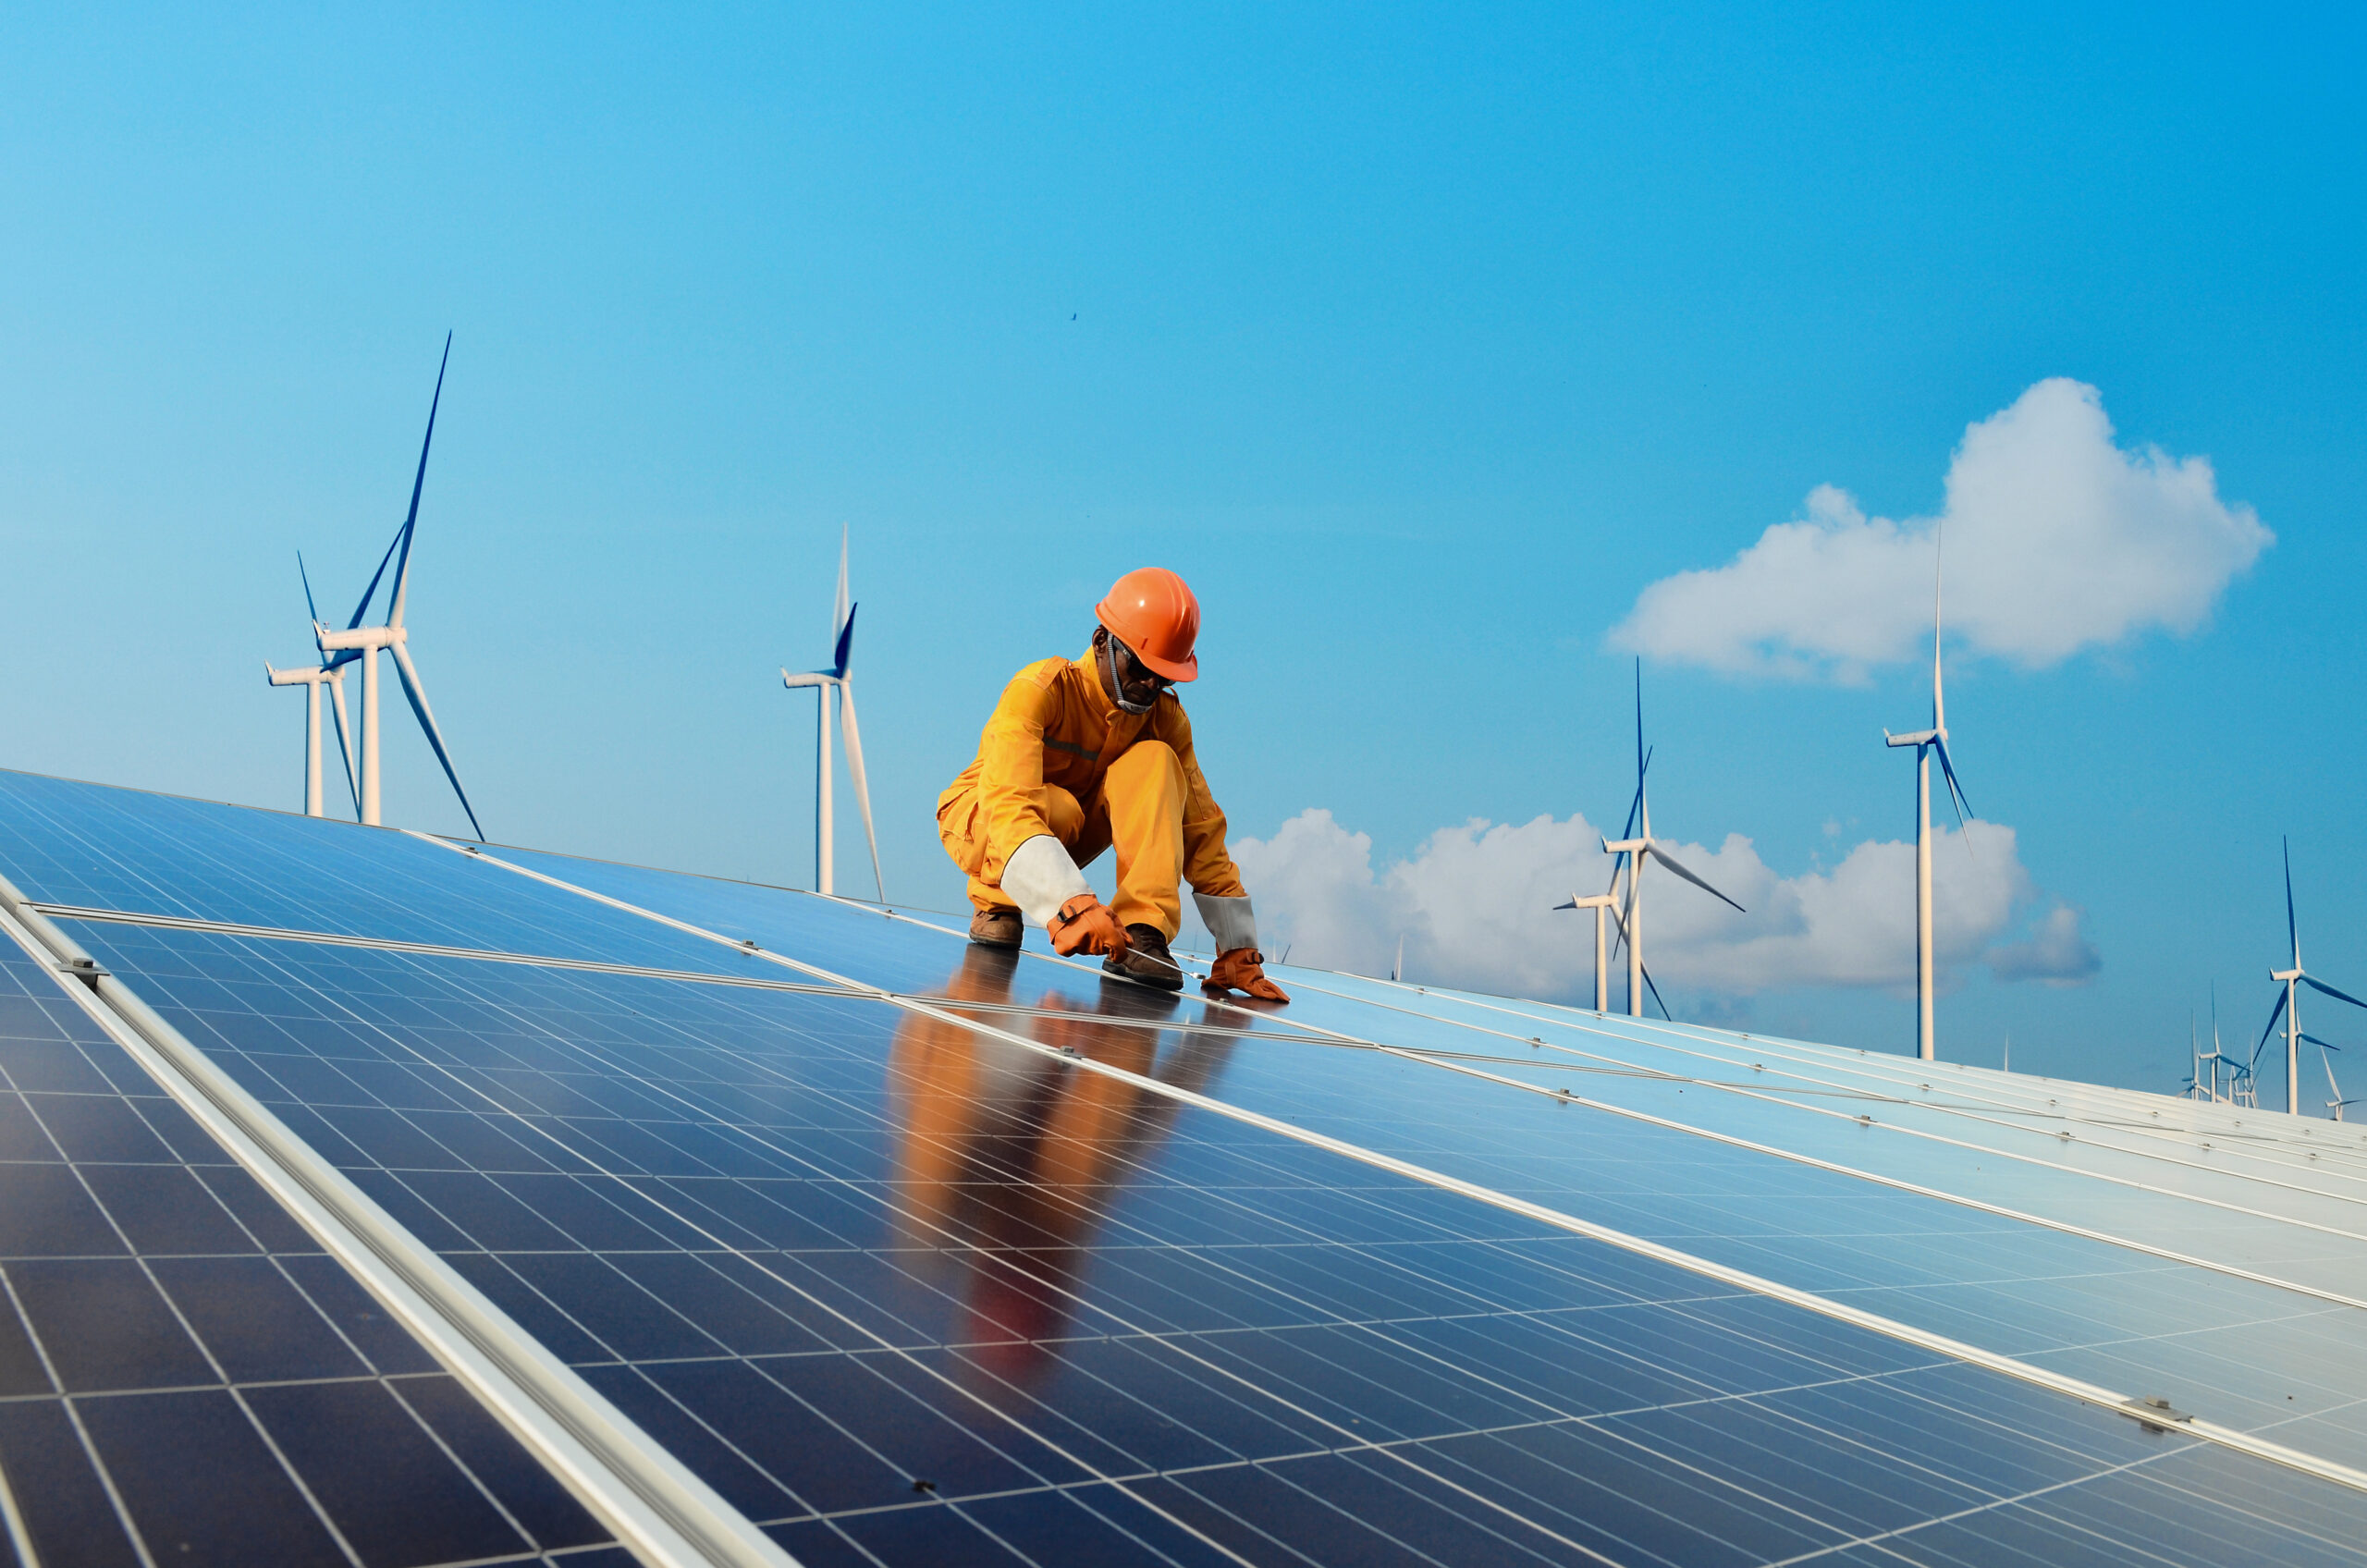 A depiction of clean renewable energy jobs. A person in protective work attre, rain gear and a hardhat and gloves, crouches atop a wide array of solar panels, working on installing or adjusting the clean energy technology. The person appears to be Black. In the background is a blue sky with puffy white clouds. On the horizong are half a dozen large scale wind generators.